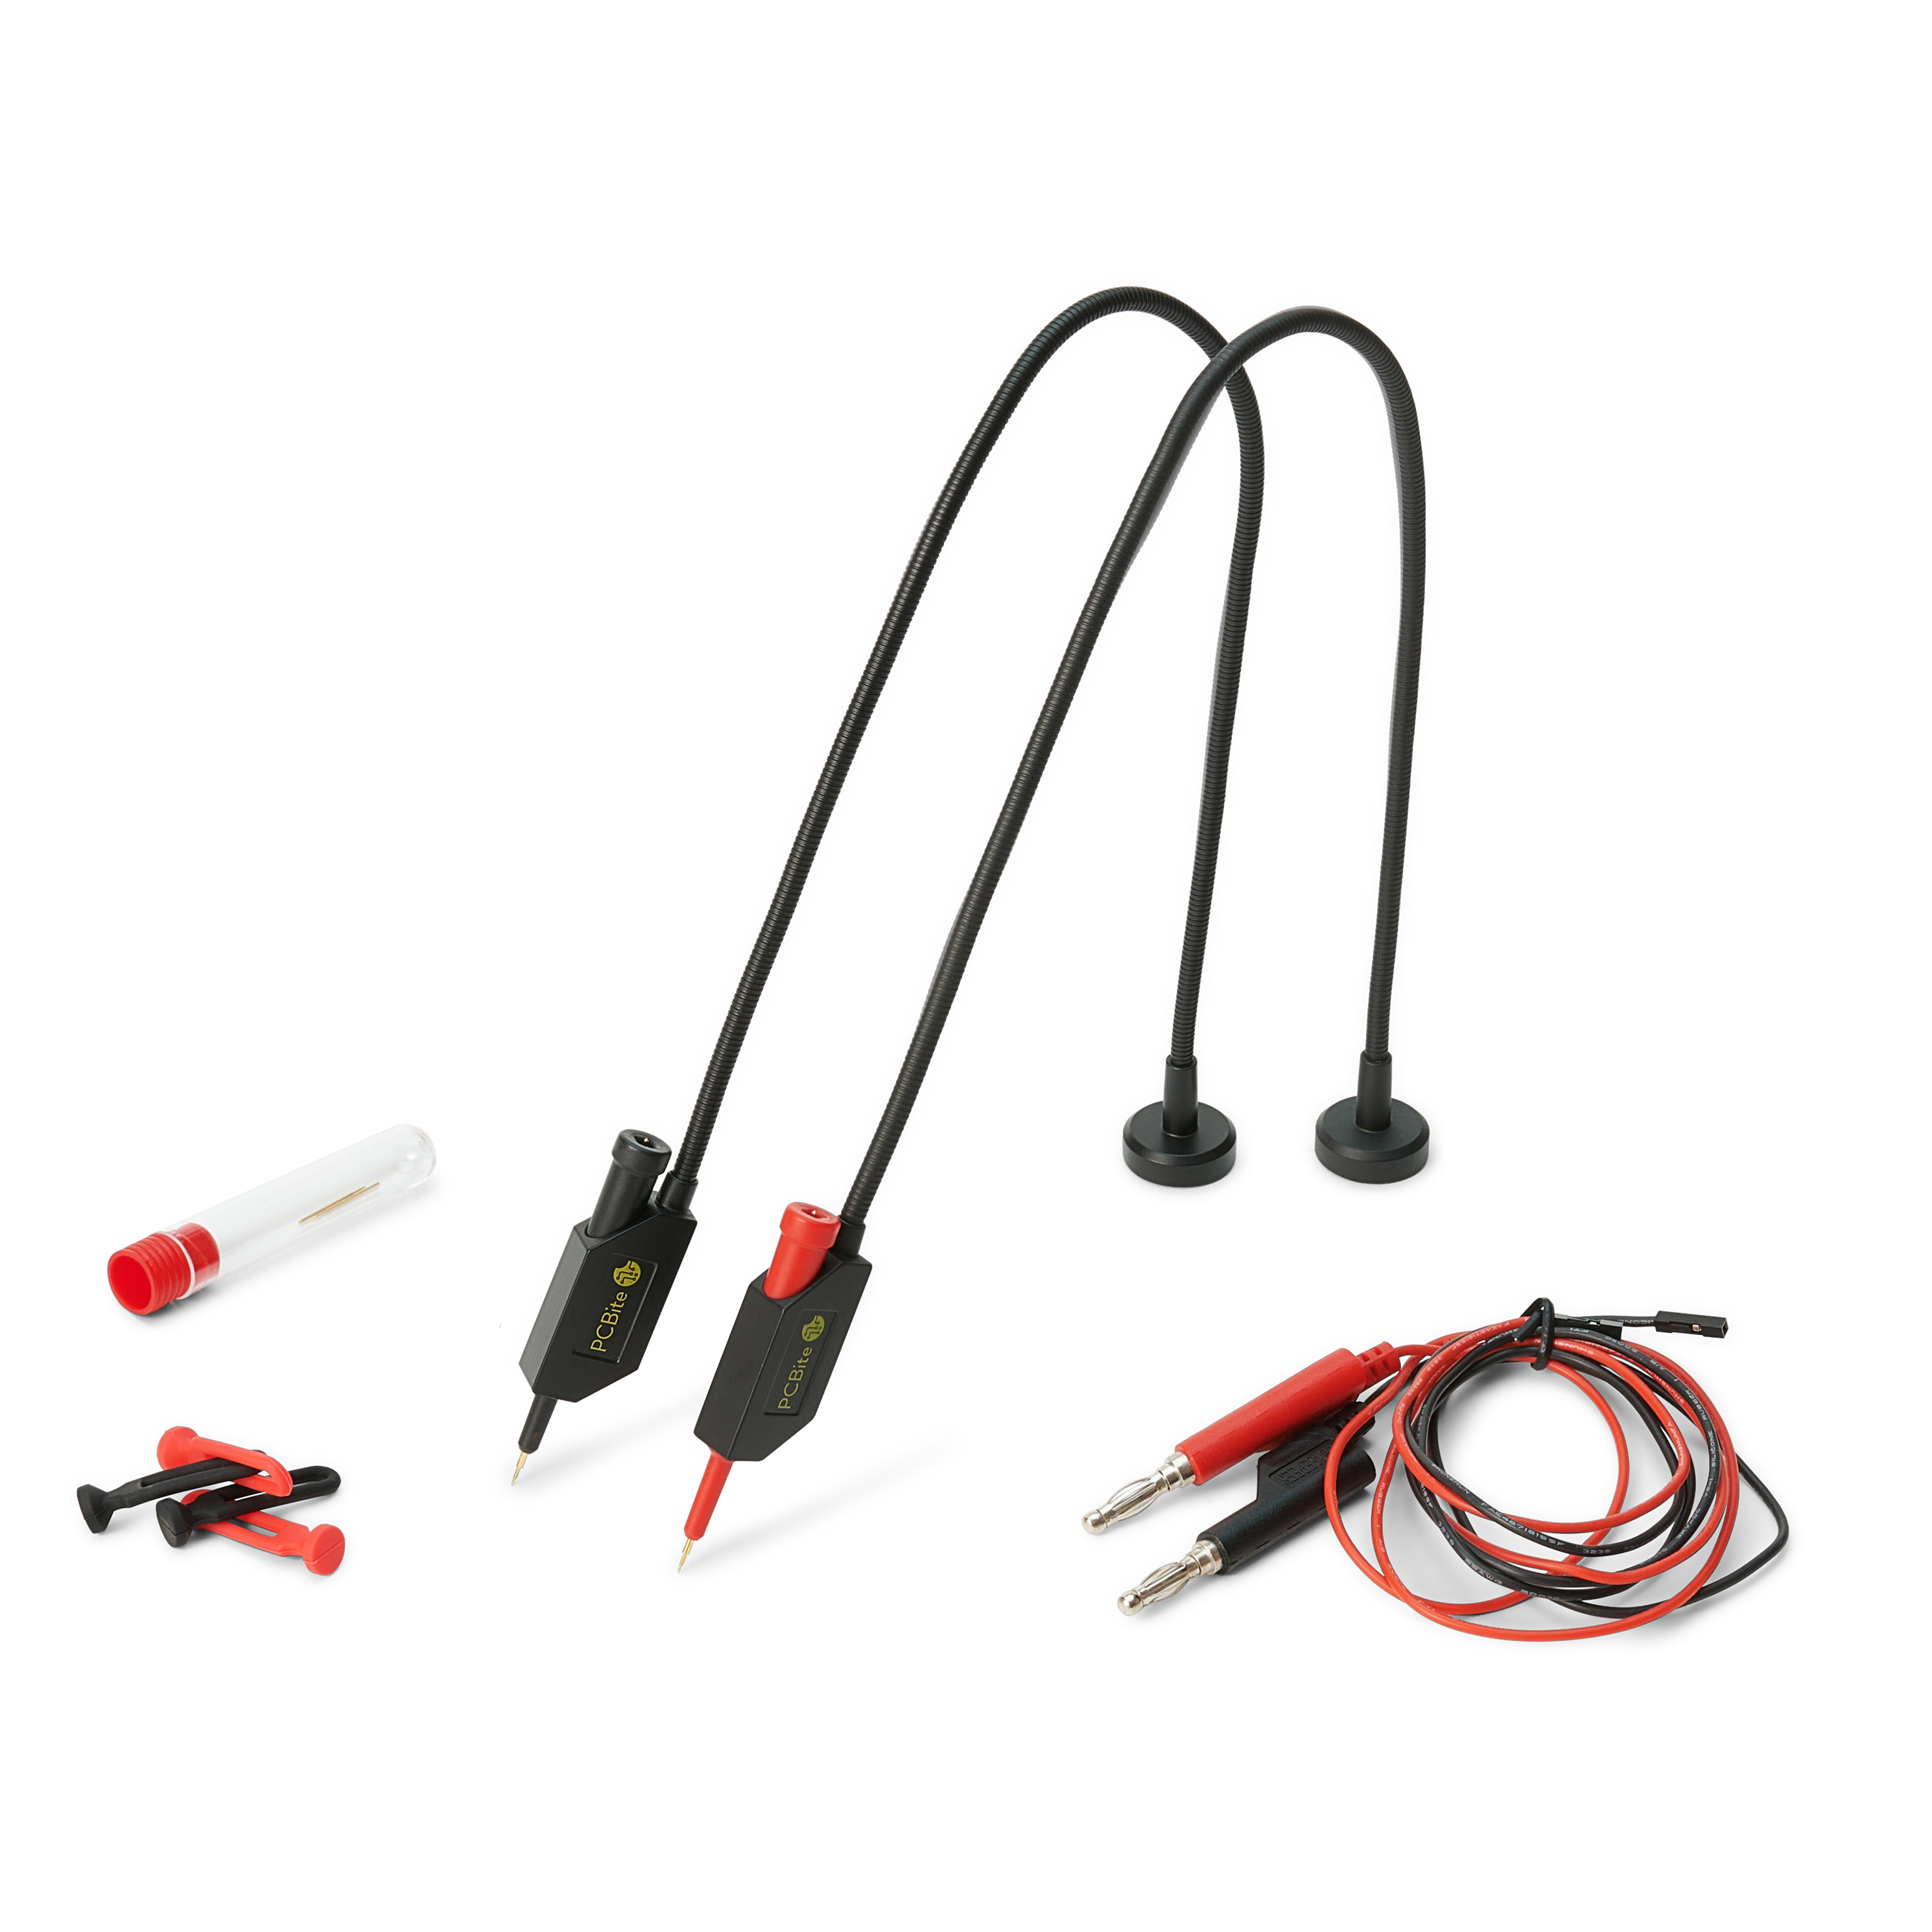 2x SQ10 probes for DMM (red/black) @ electrokit